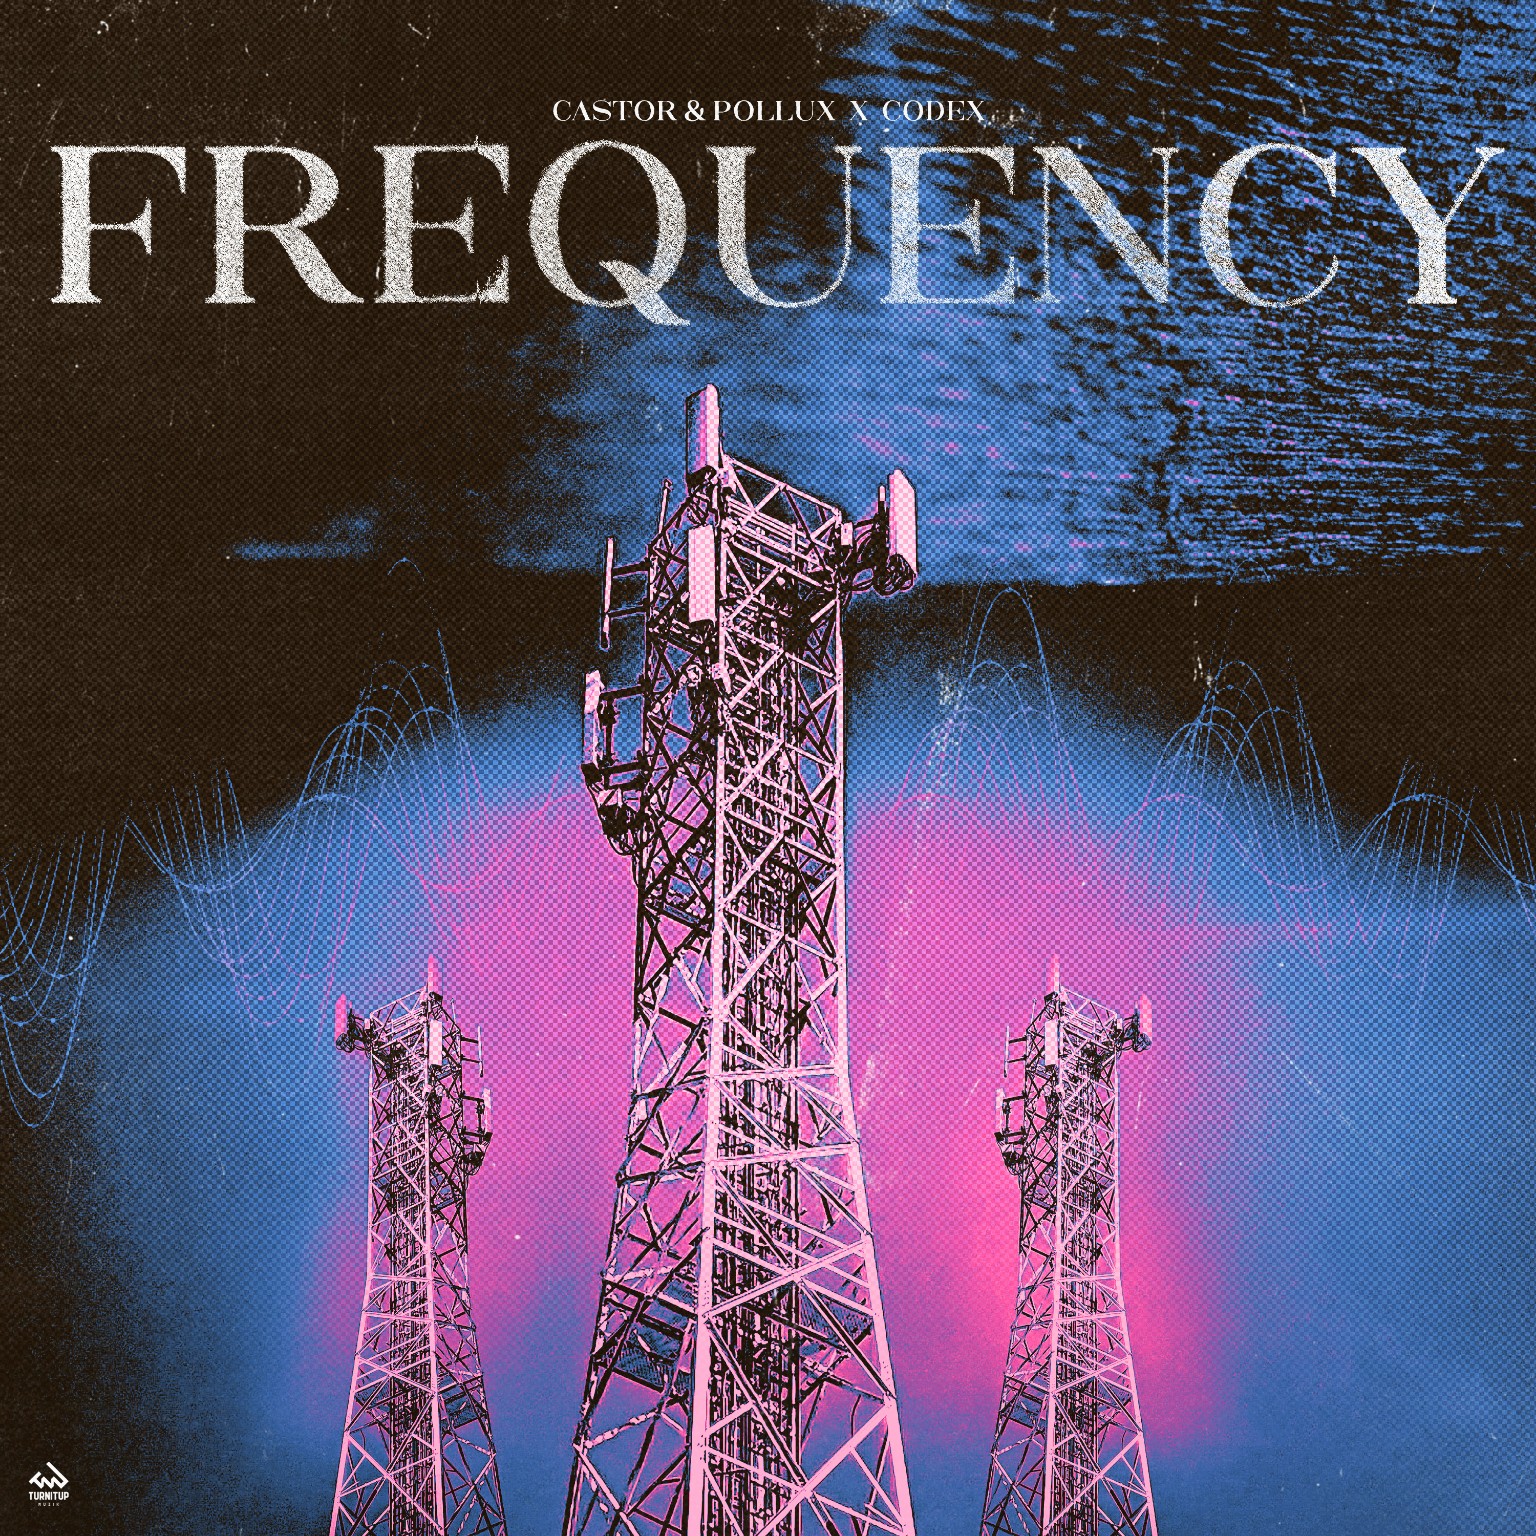 Frequency by Castor & Pollux